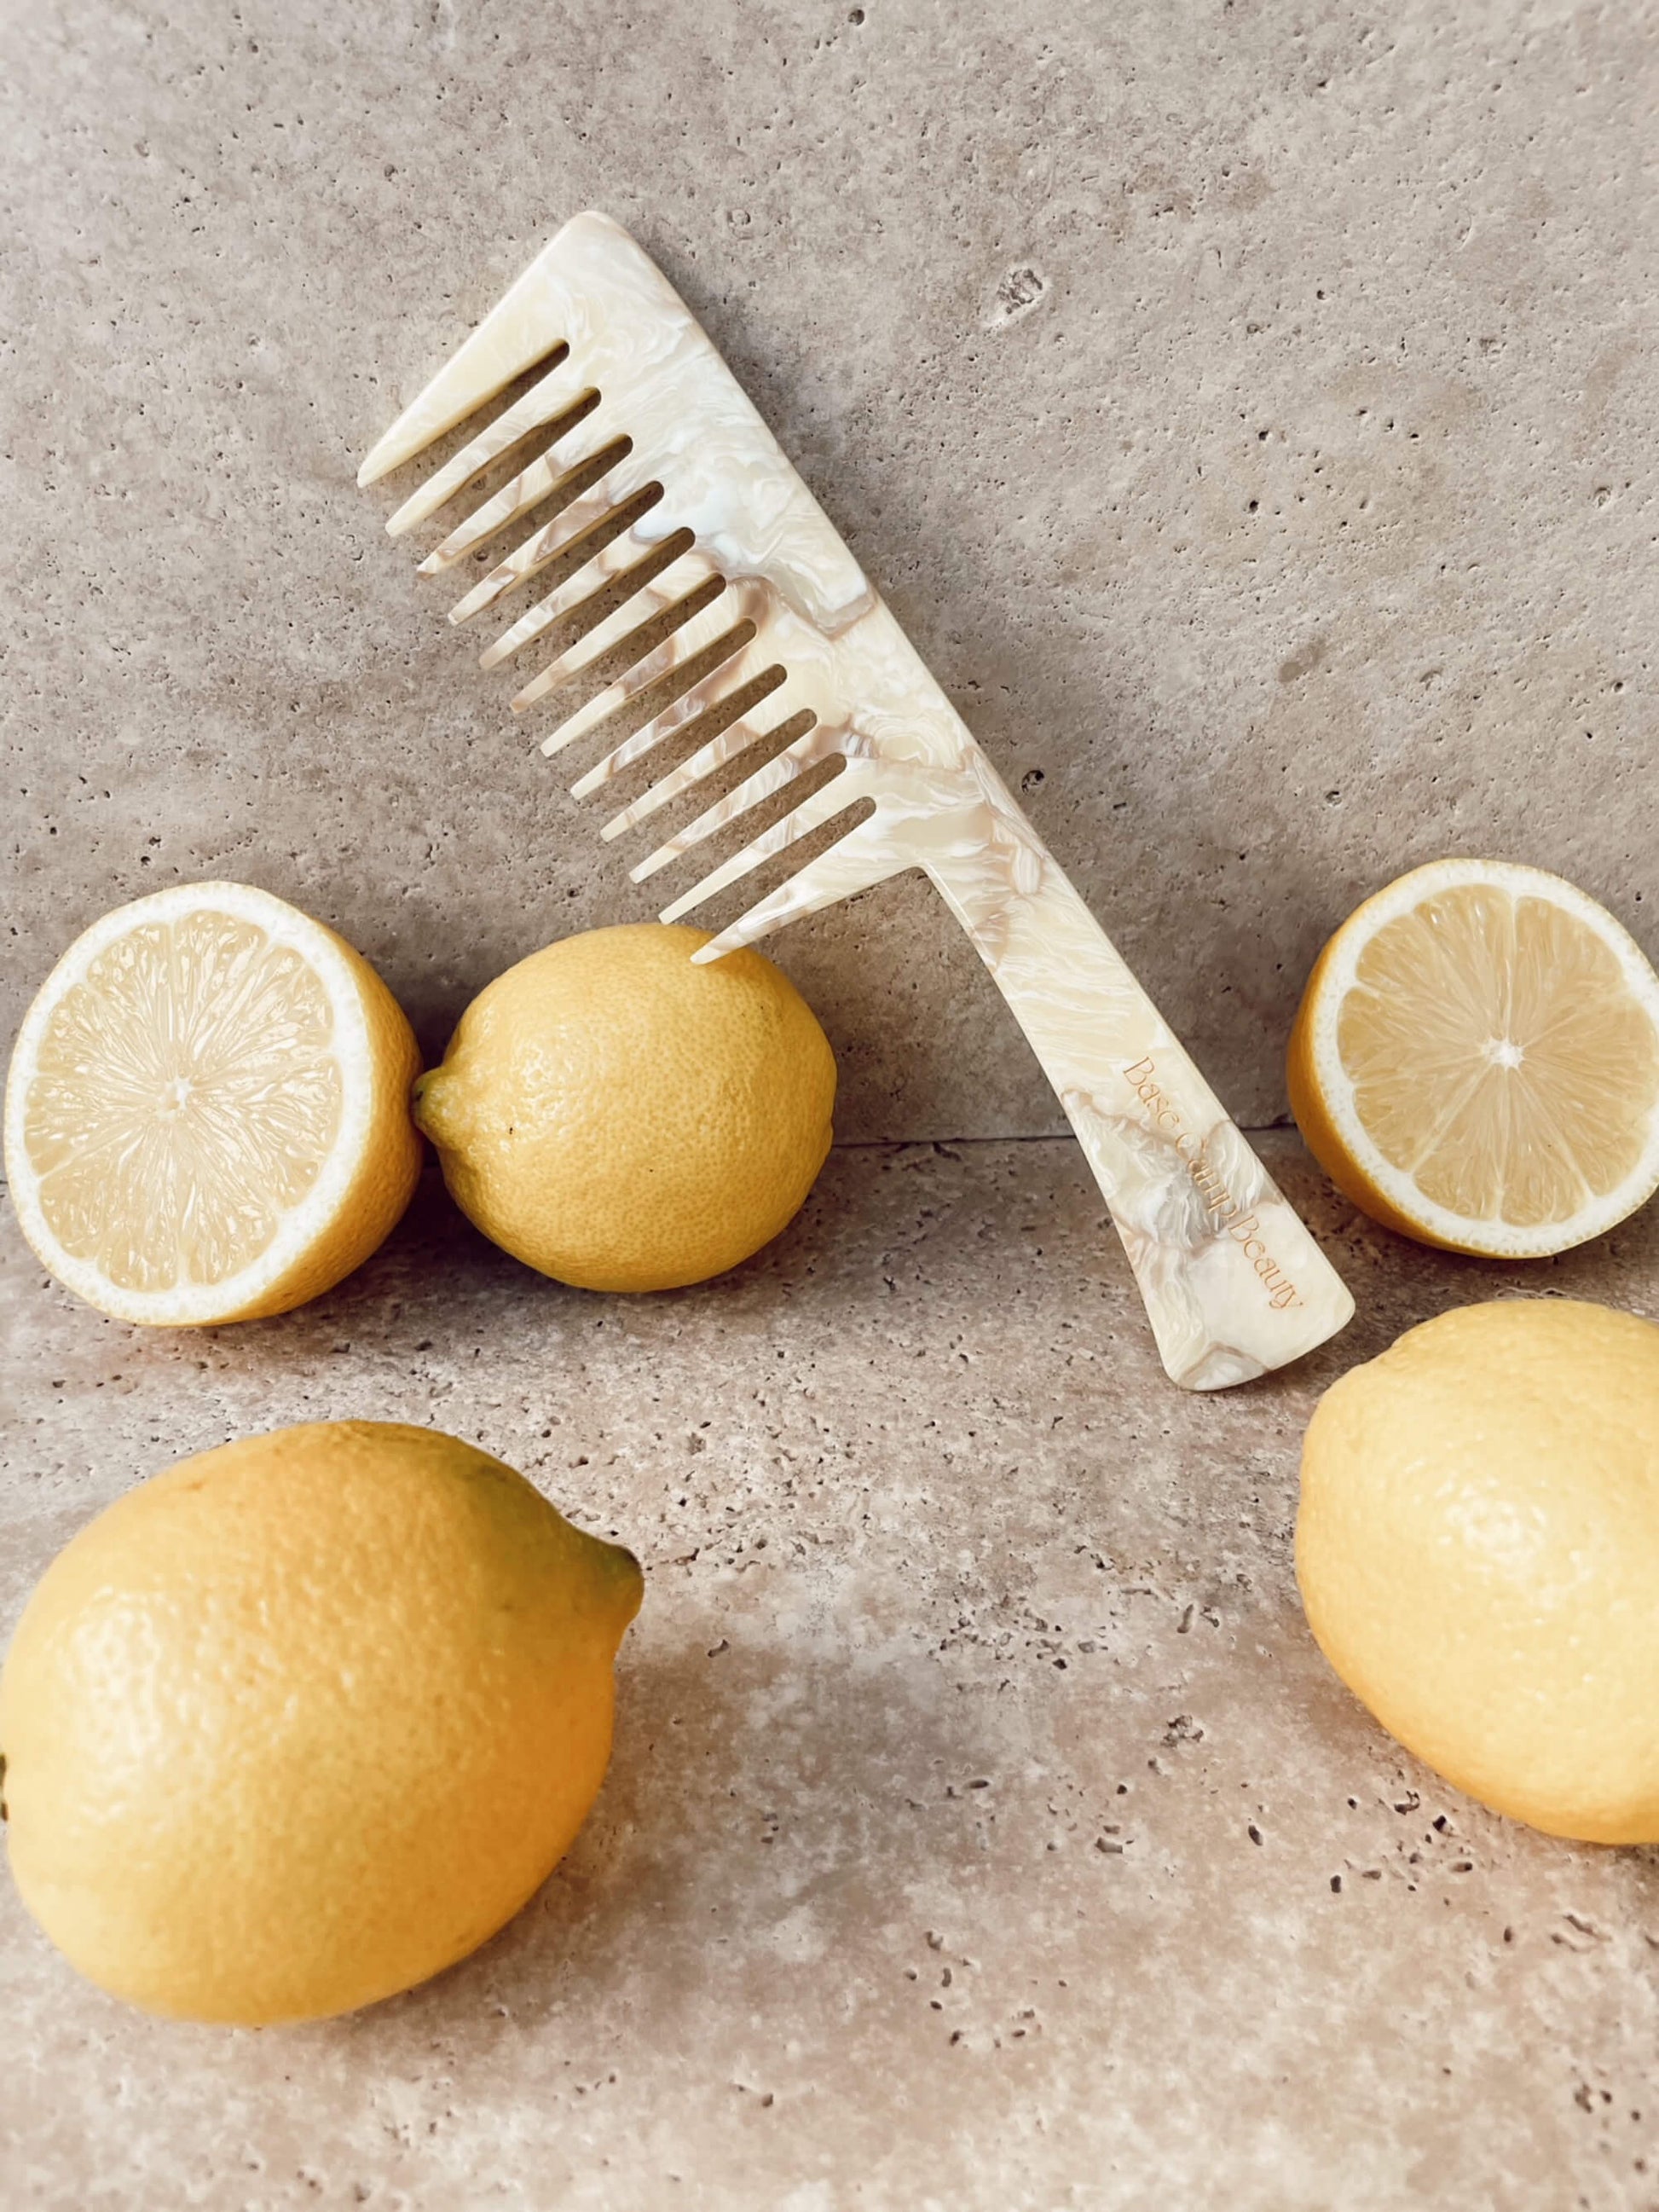 Base Camp Beauty Comb in colour buttermilk styled with lemons.